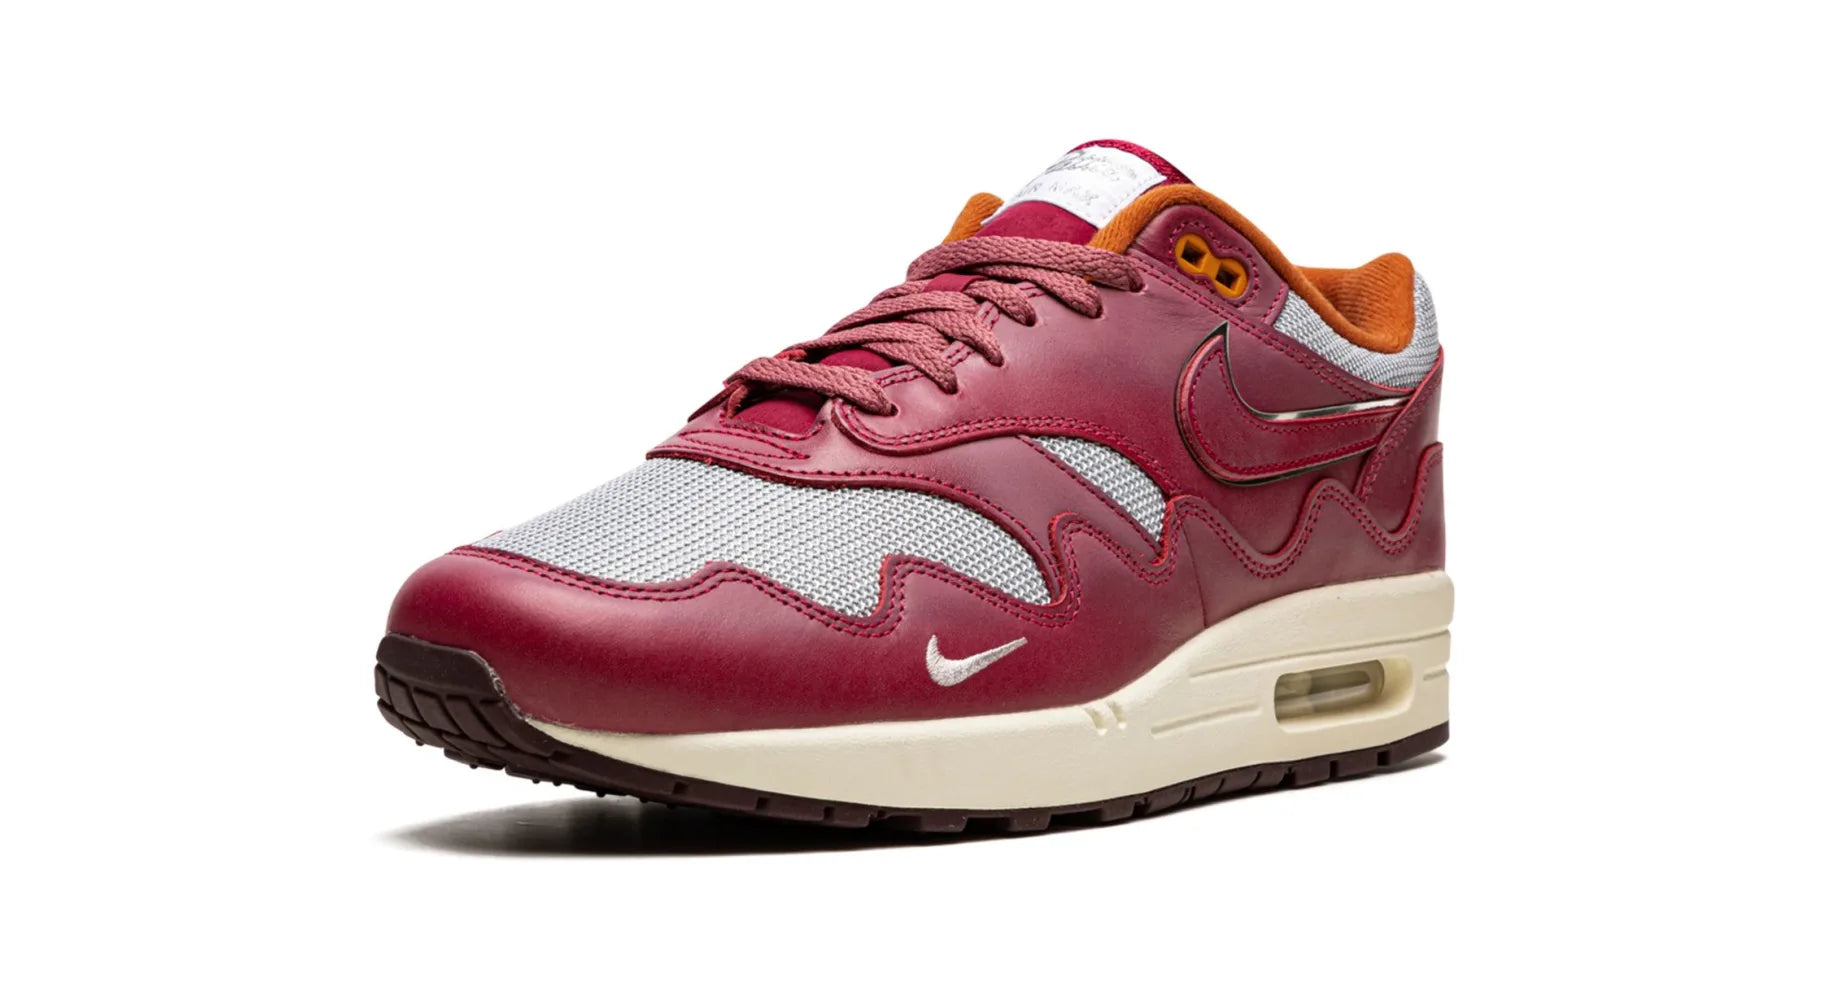 Nike Air Max 1 Patta Waves Rush Maroon (without Bracelet)